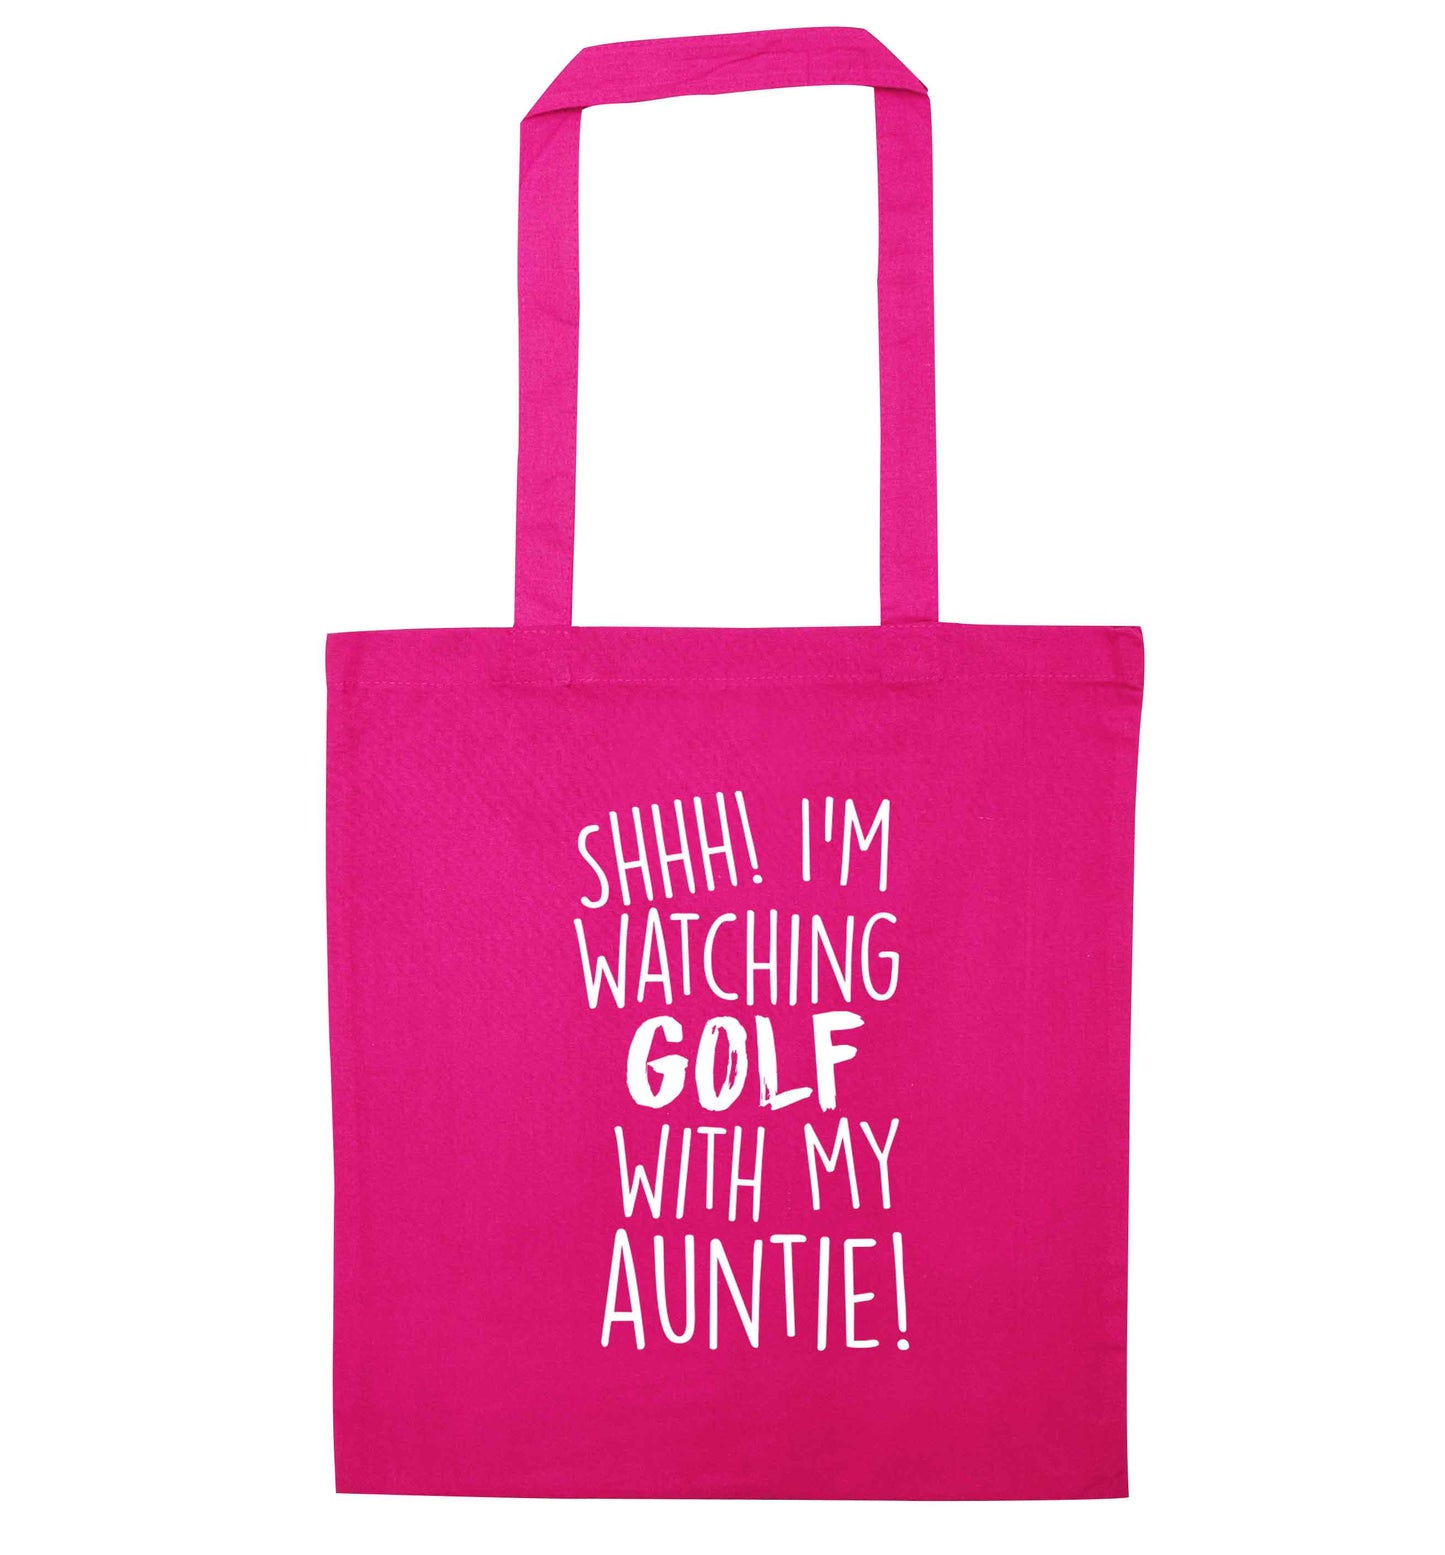 Shh I'm watching golf with my auntie pink tote bag